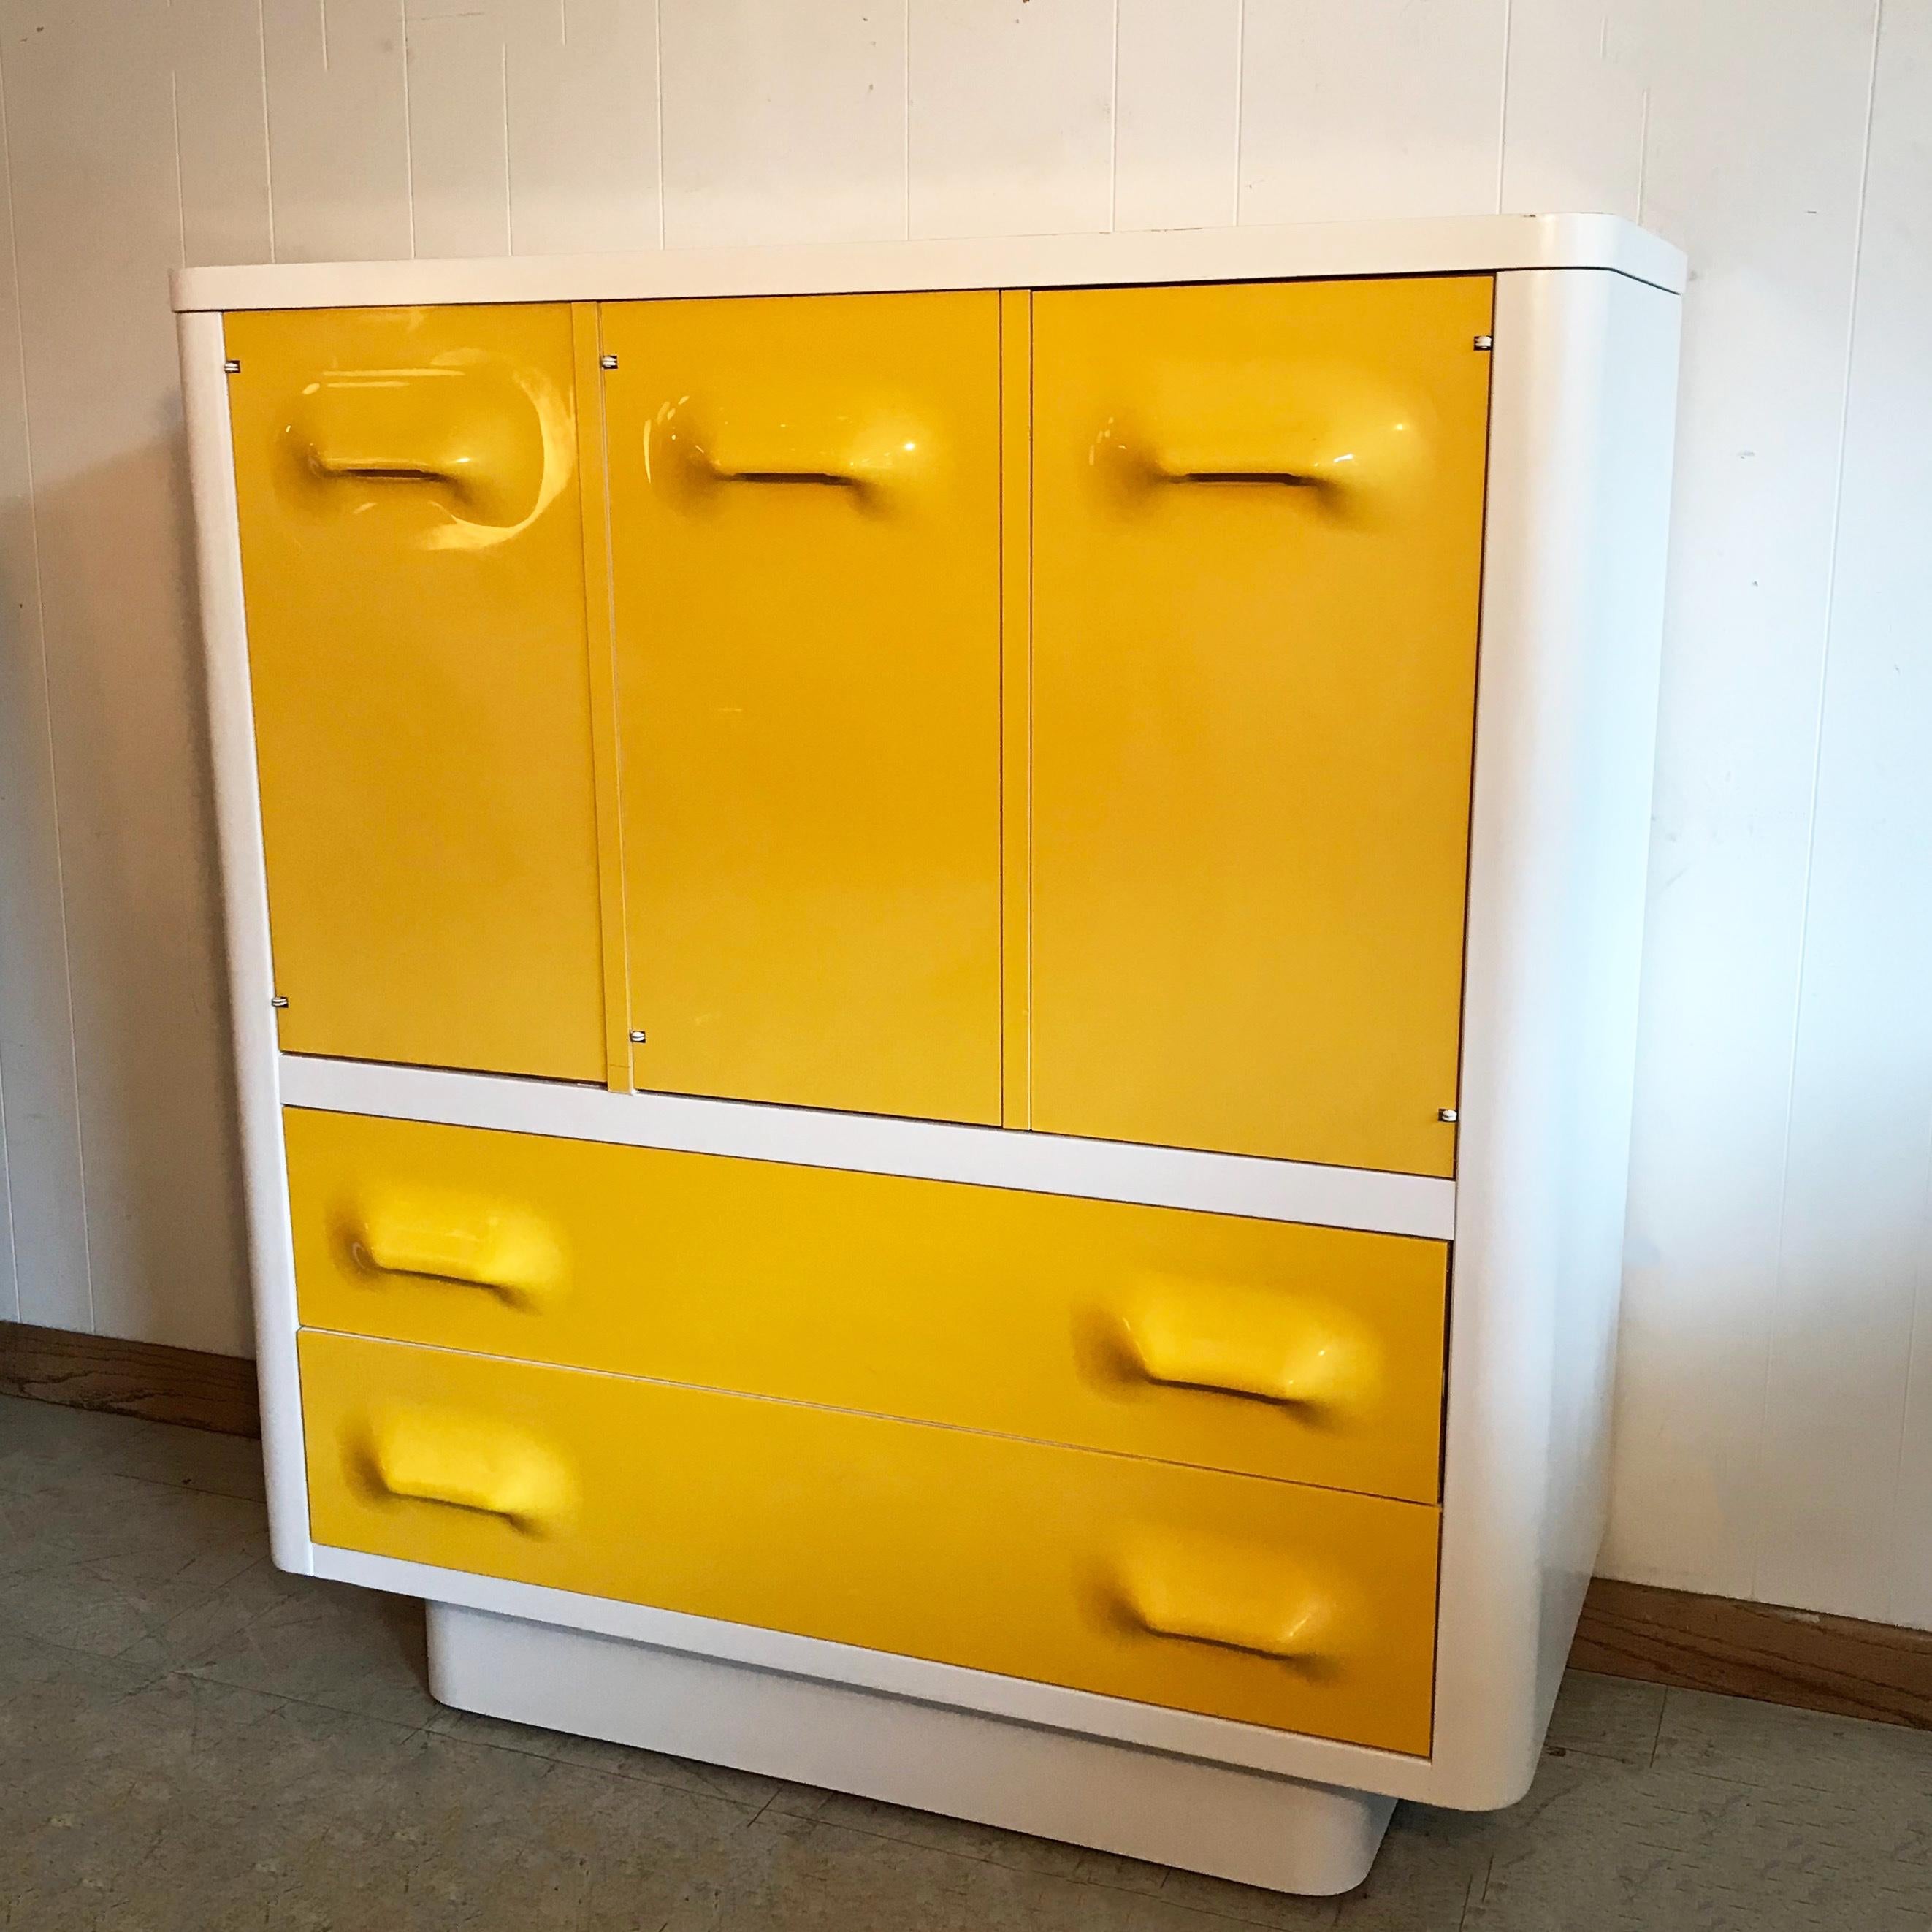 Mid-Century Modern, highboy dresser by Broyhill Premier Chapter One Series features vibrant yellow, molded plastic drawers encased in white lacquered wood frame. The interior has ample storage. The top left compartment has one shelf.